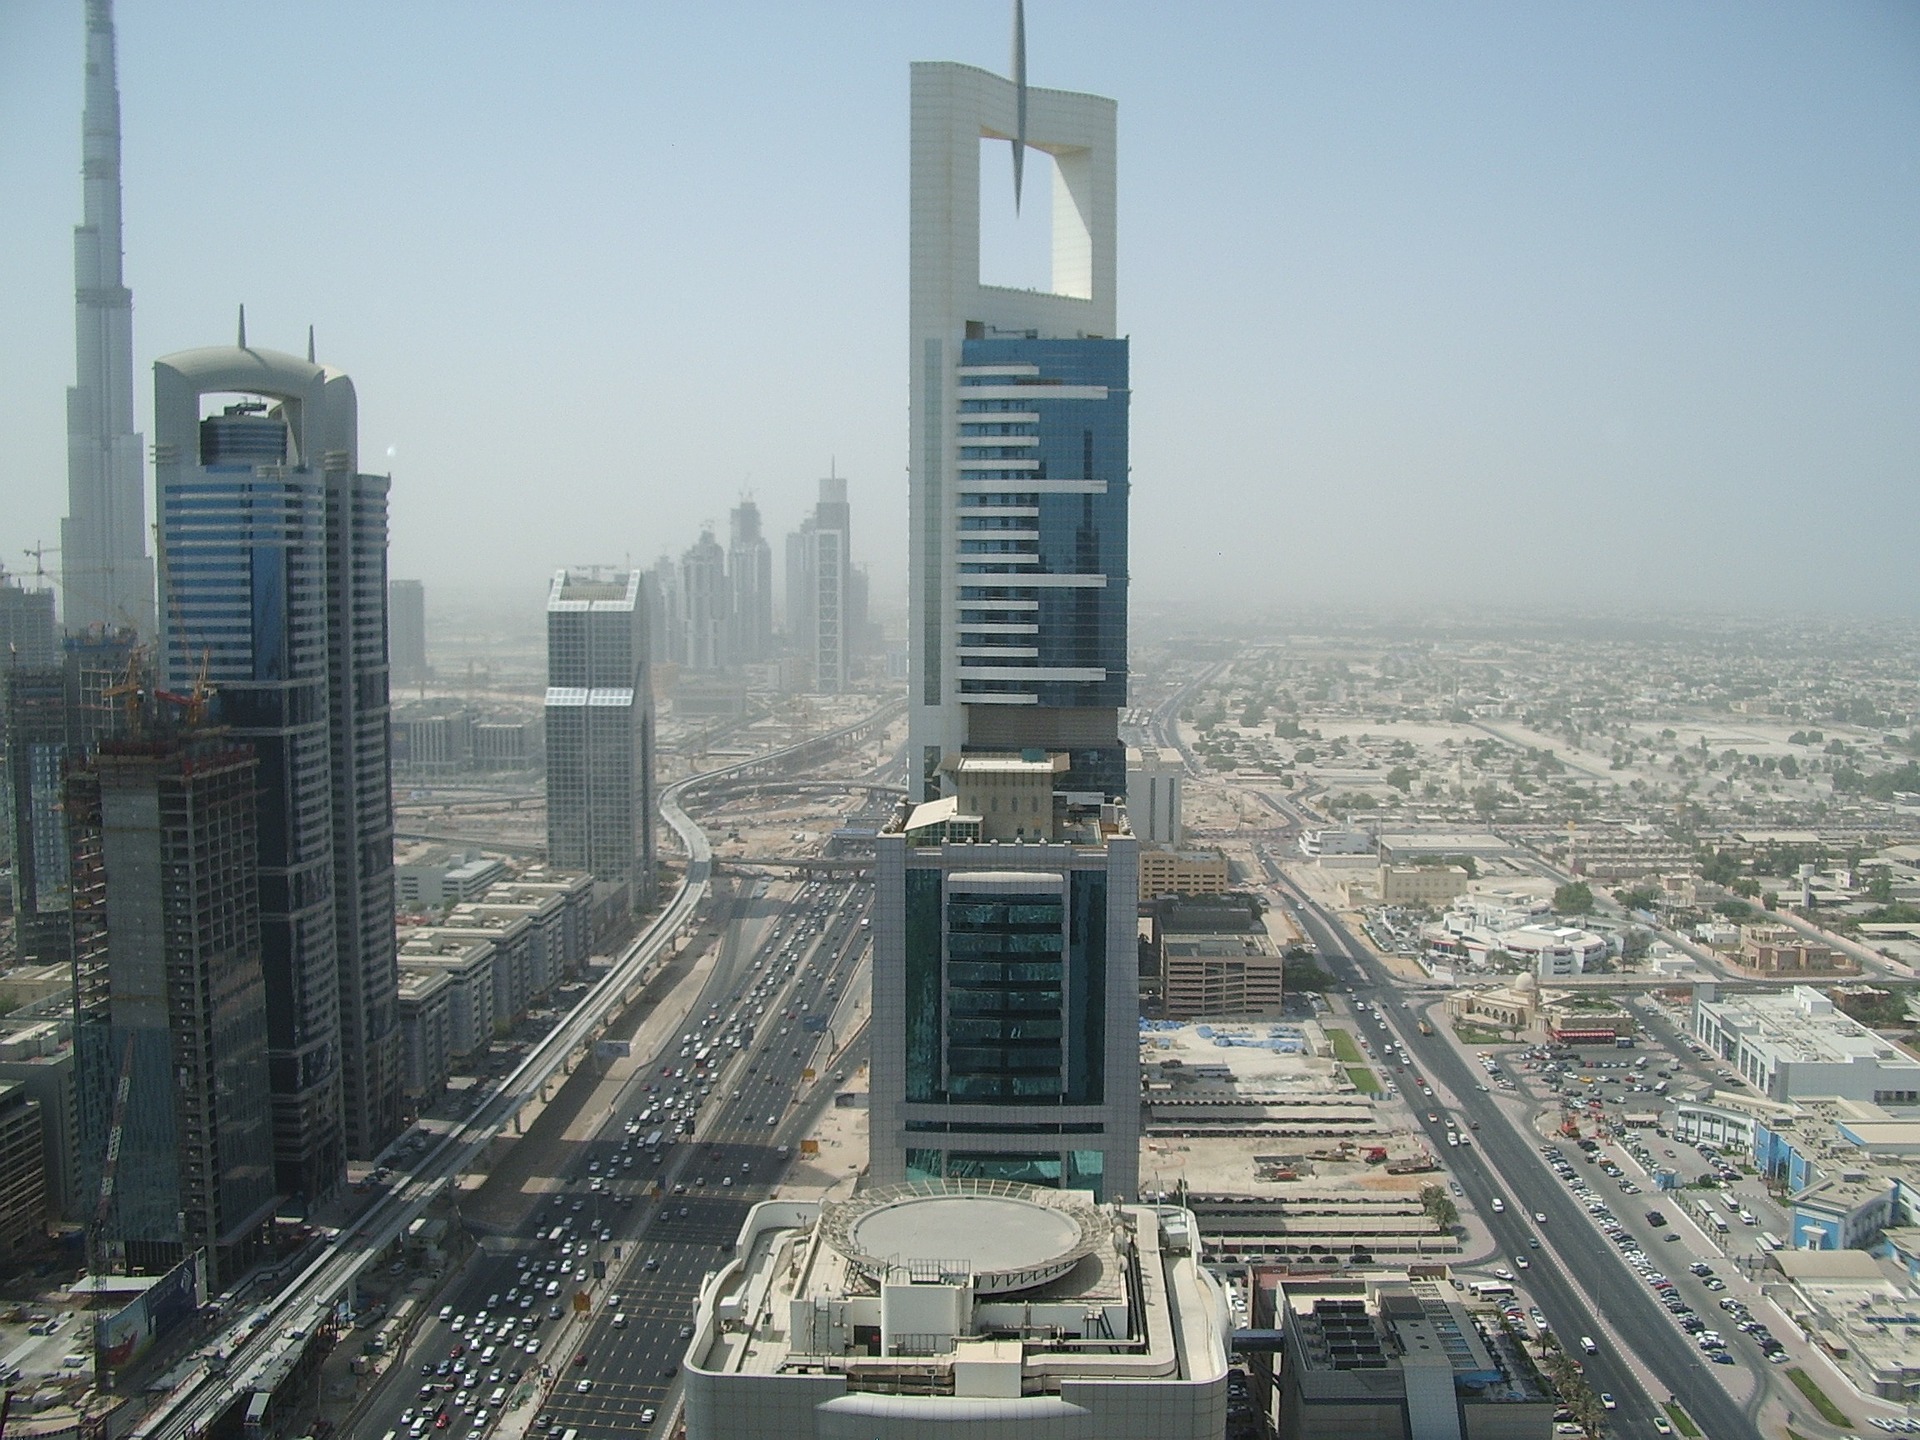 UAE Banks and Banking Sites in UAE